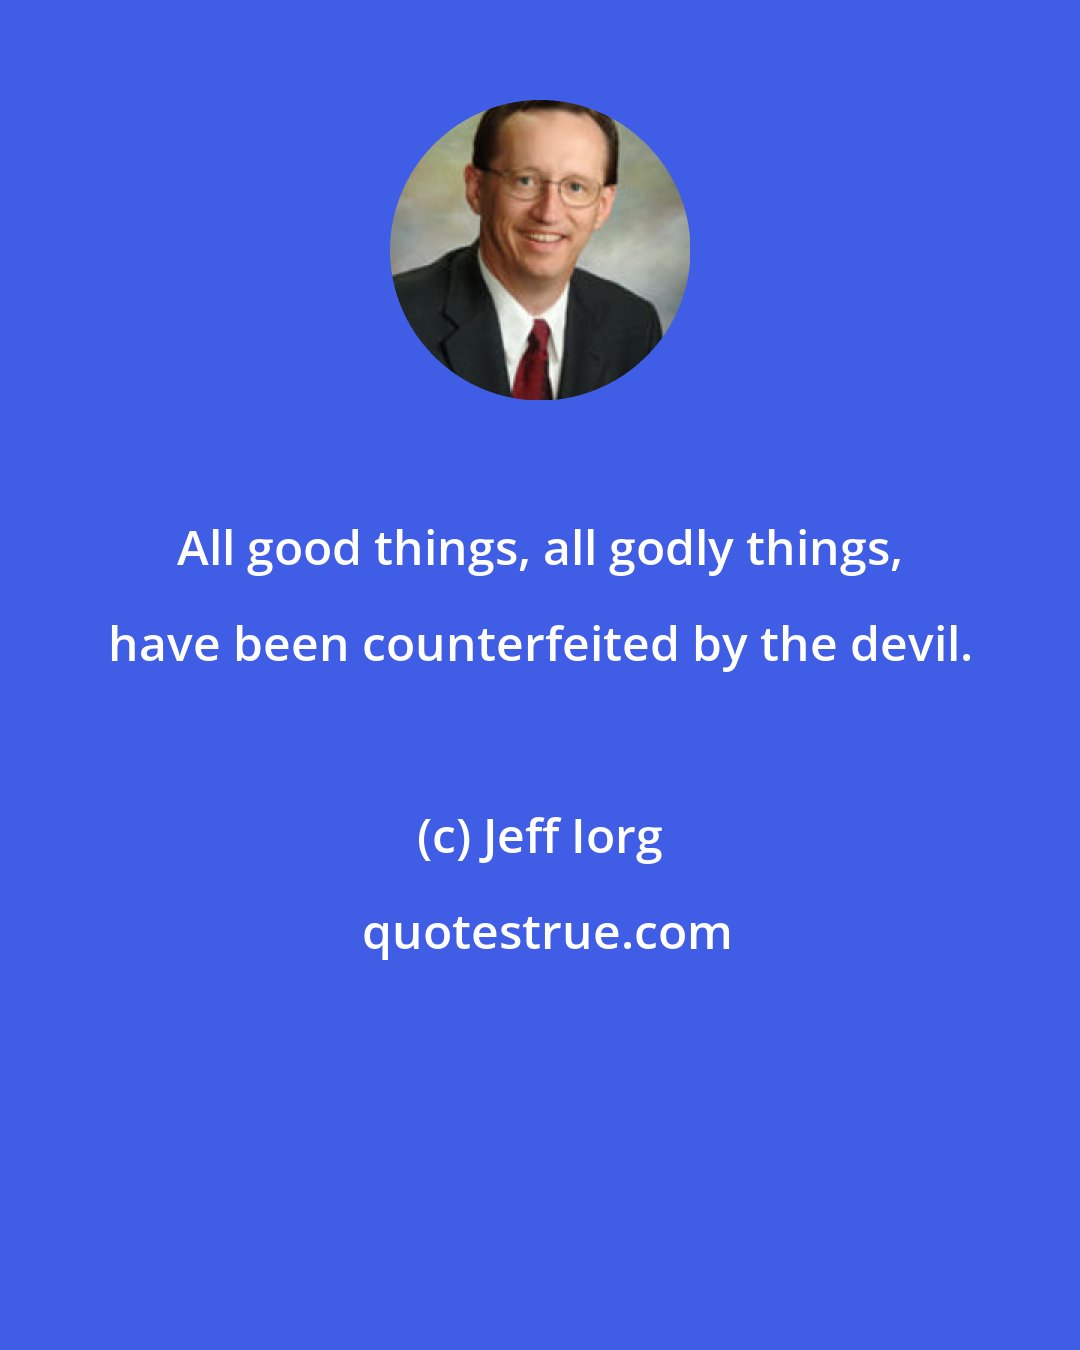 Jeff Iorg: All good things, all godly things, have been counterfeited by the devil.